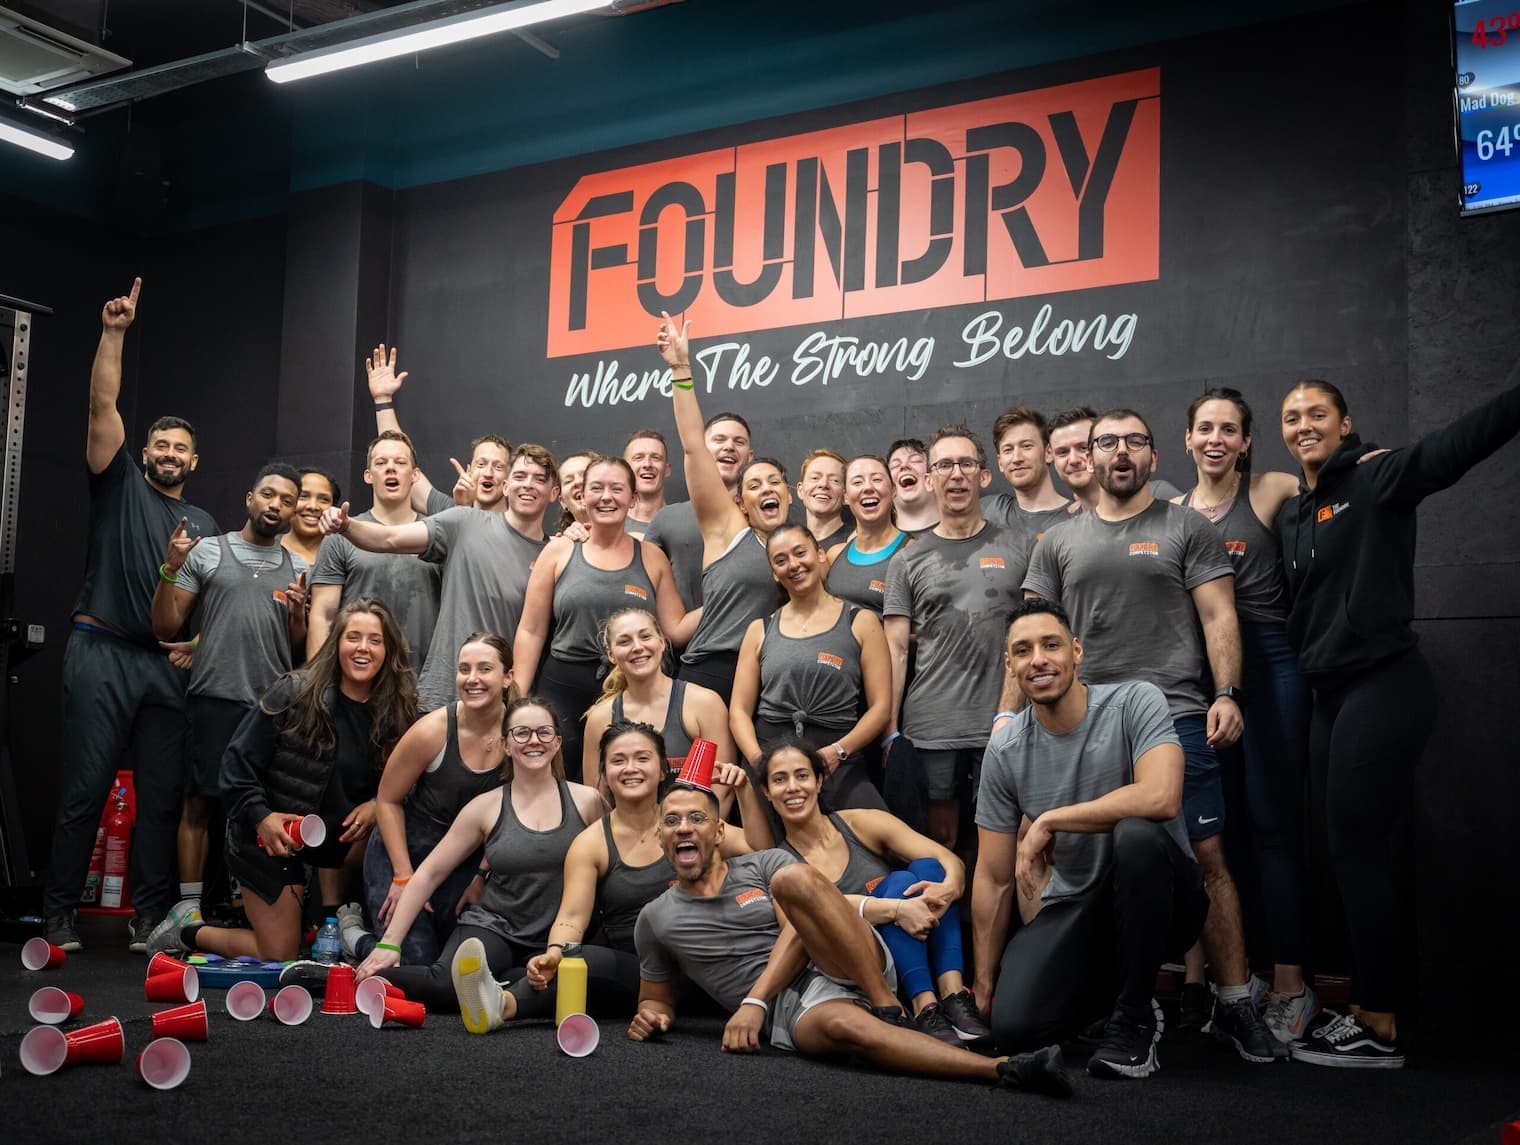 Our West London Gyms Take a Tour - Foundry Personal Training Gyms